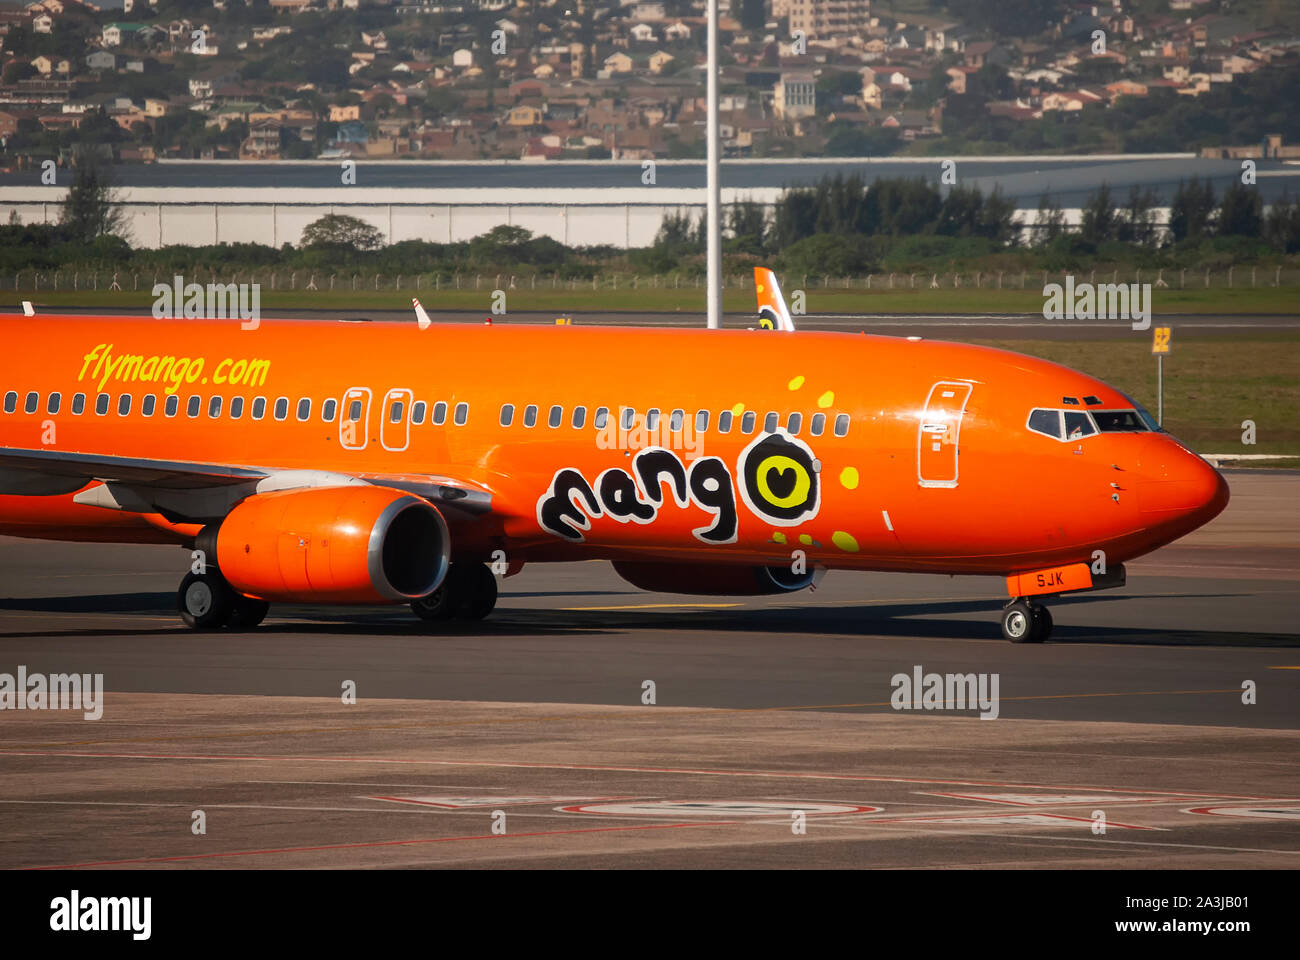 A Mango Airlines aircraft on the apron at King Shaka International Airport in Durban, South Africa Stock Photo